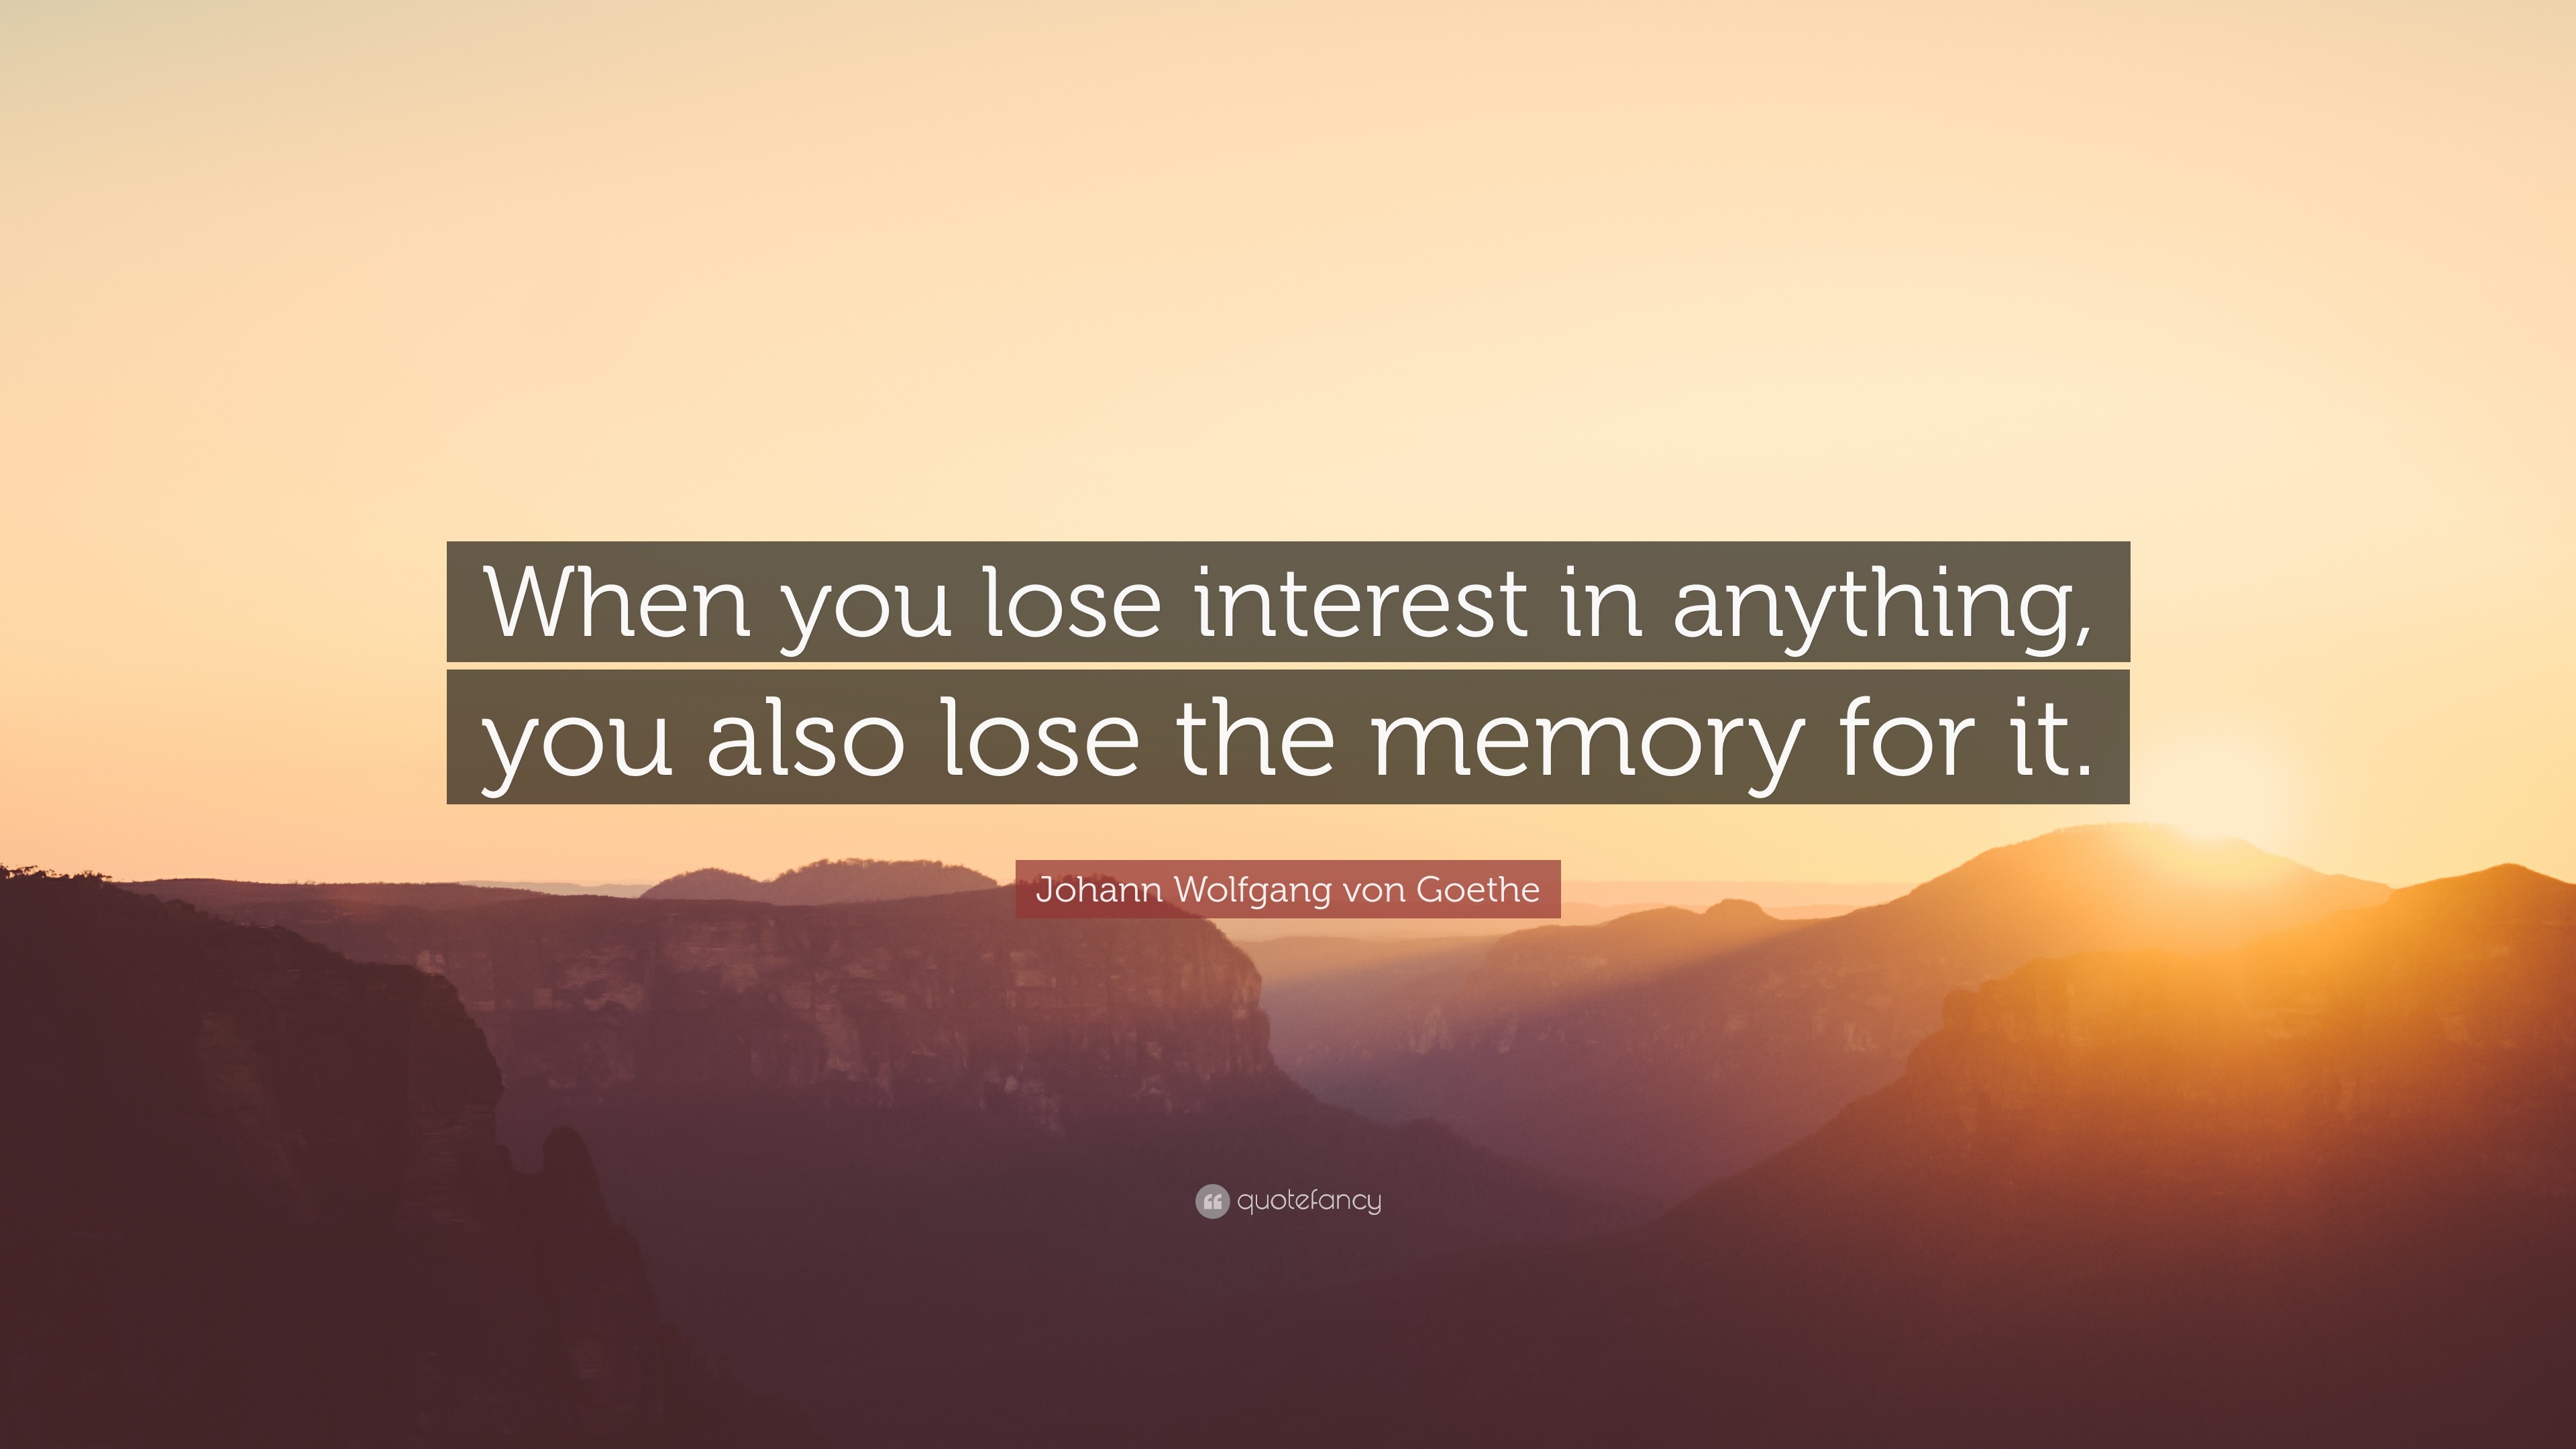 Johann Wolfgang Von Goethe Quote When You Lose Interest In Anything You Also Lose The Memory